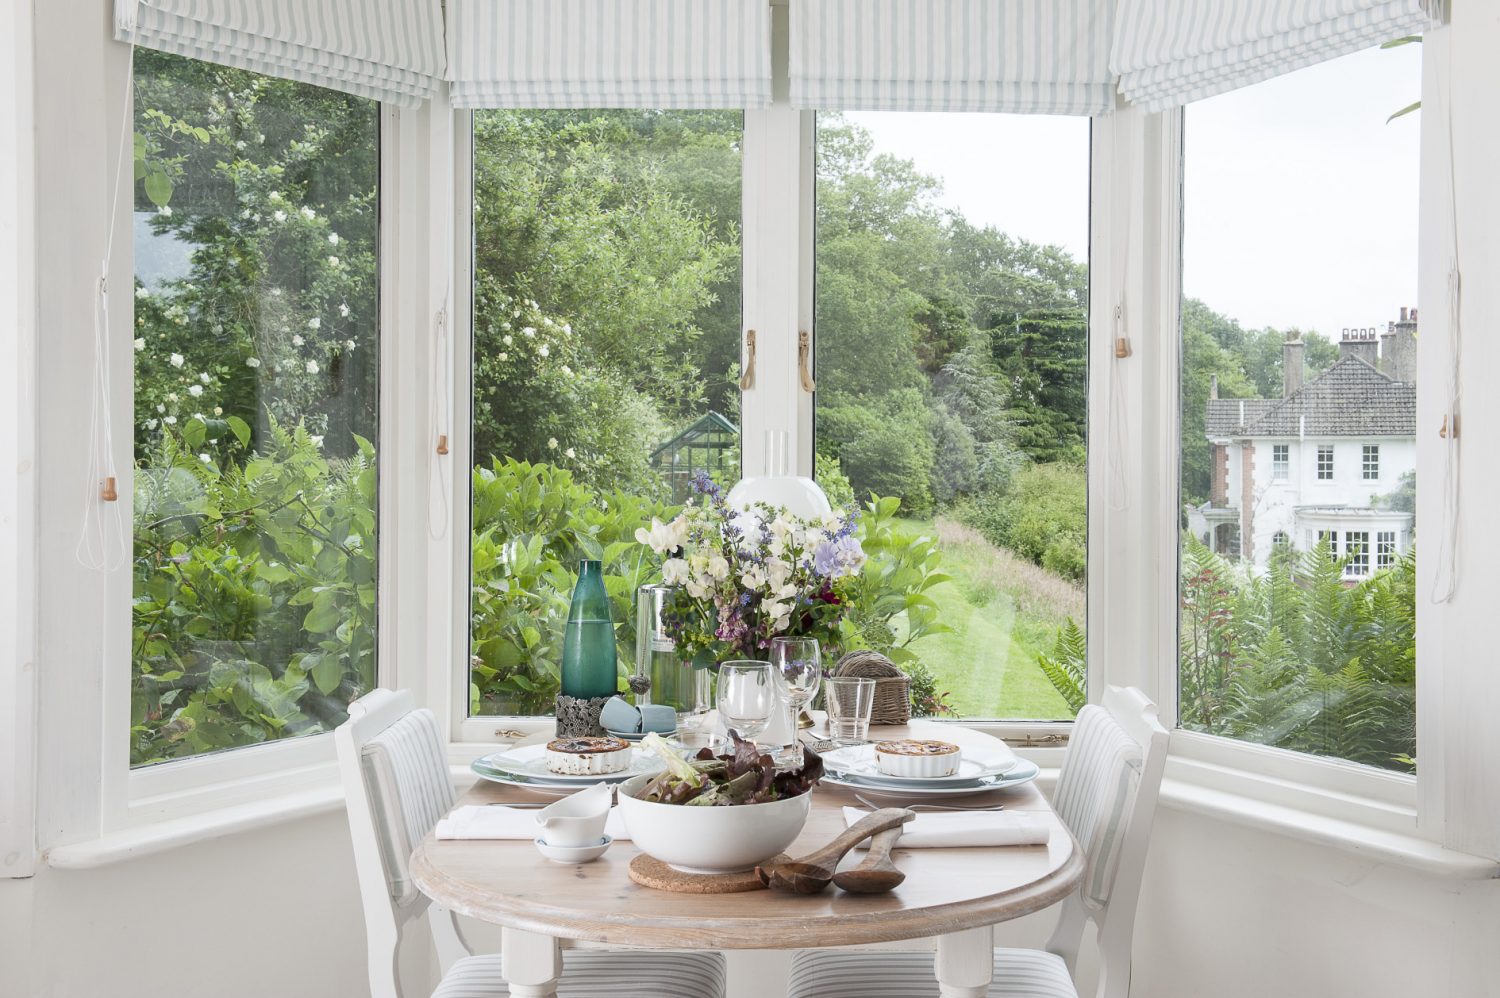 In the bay window is an intimate table for two she found at Mark Maynard in Tunbridge Wells